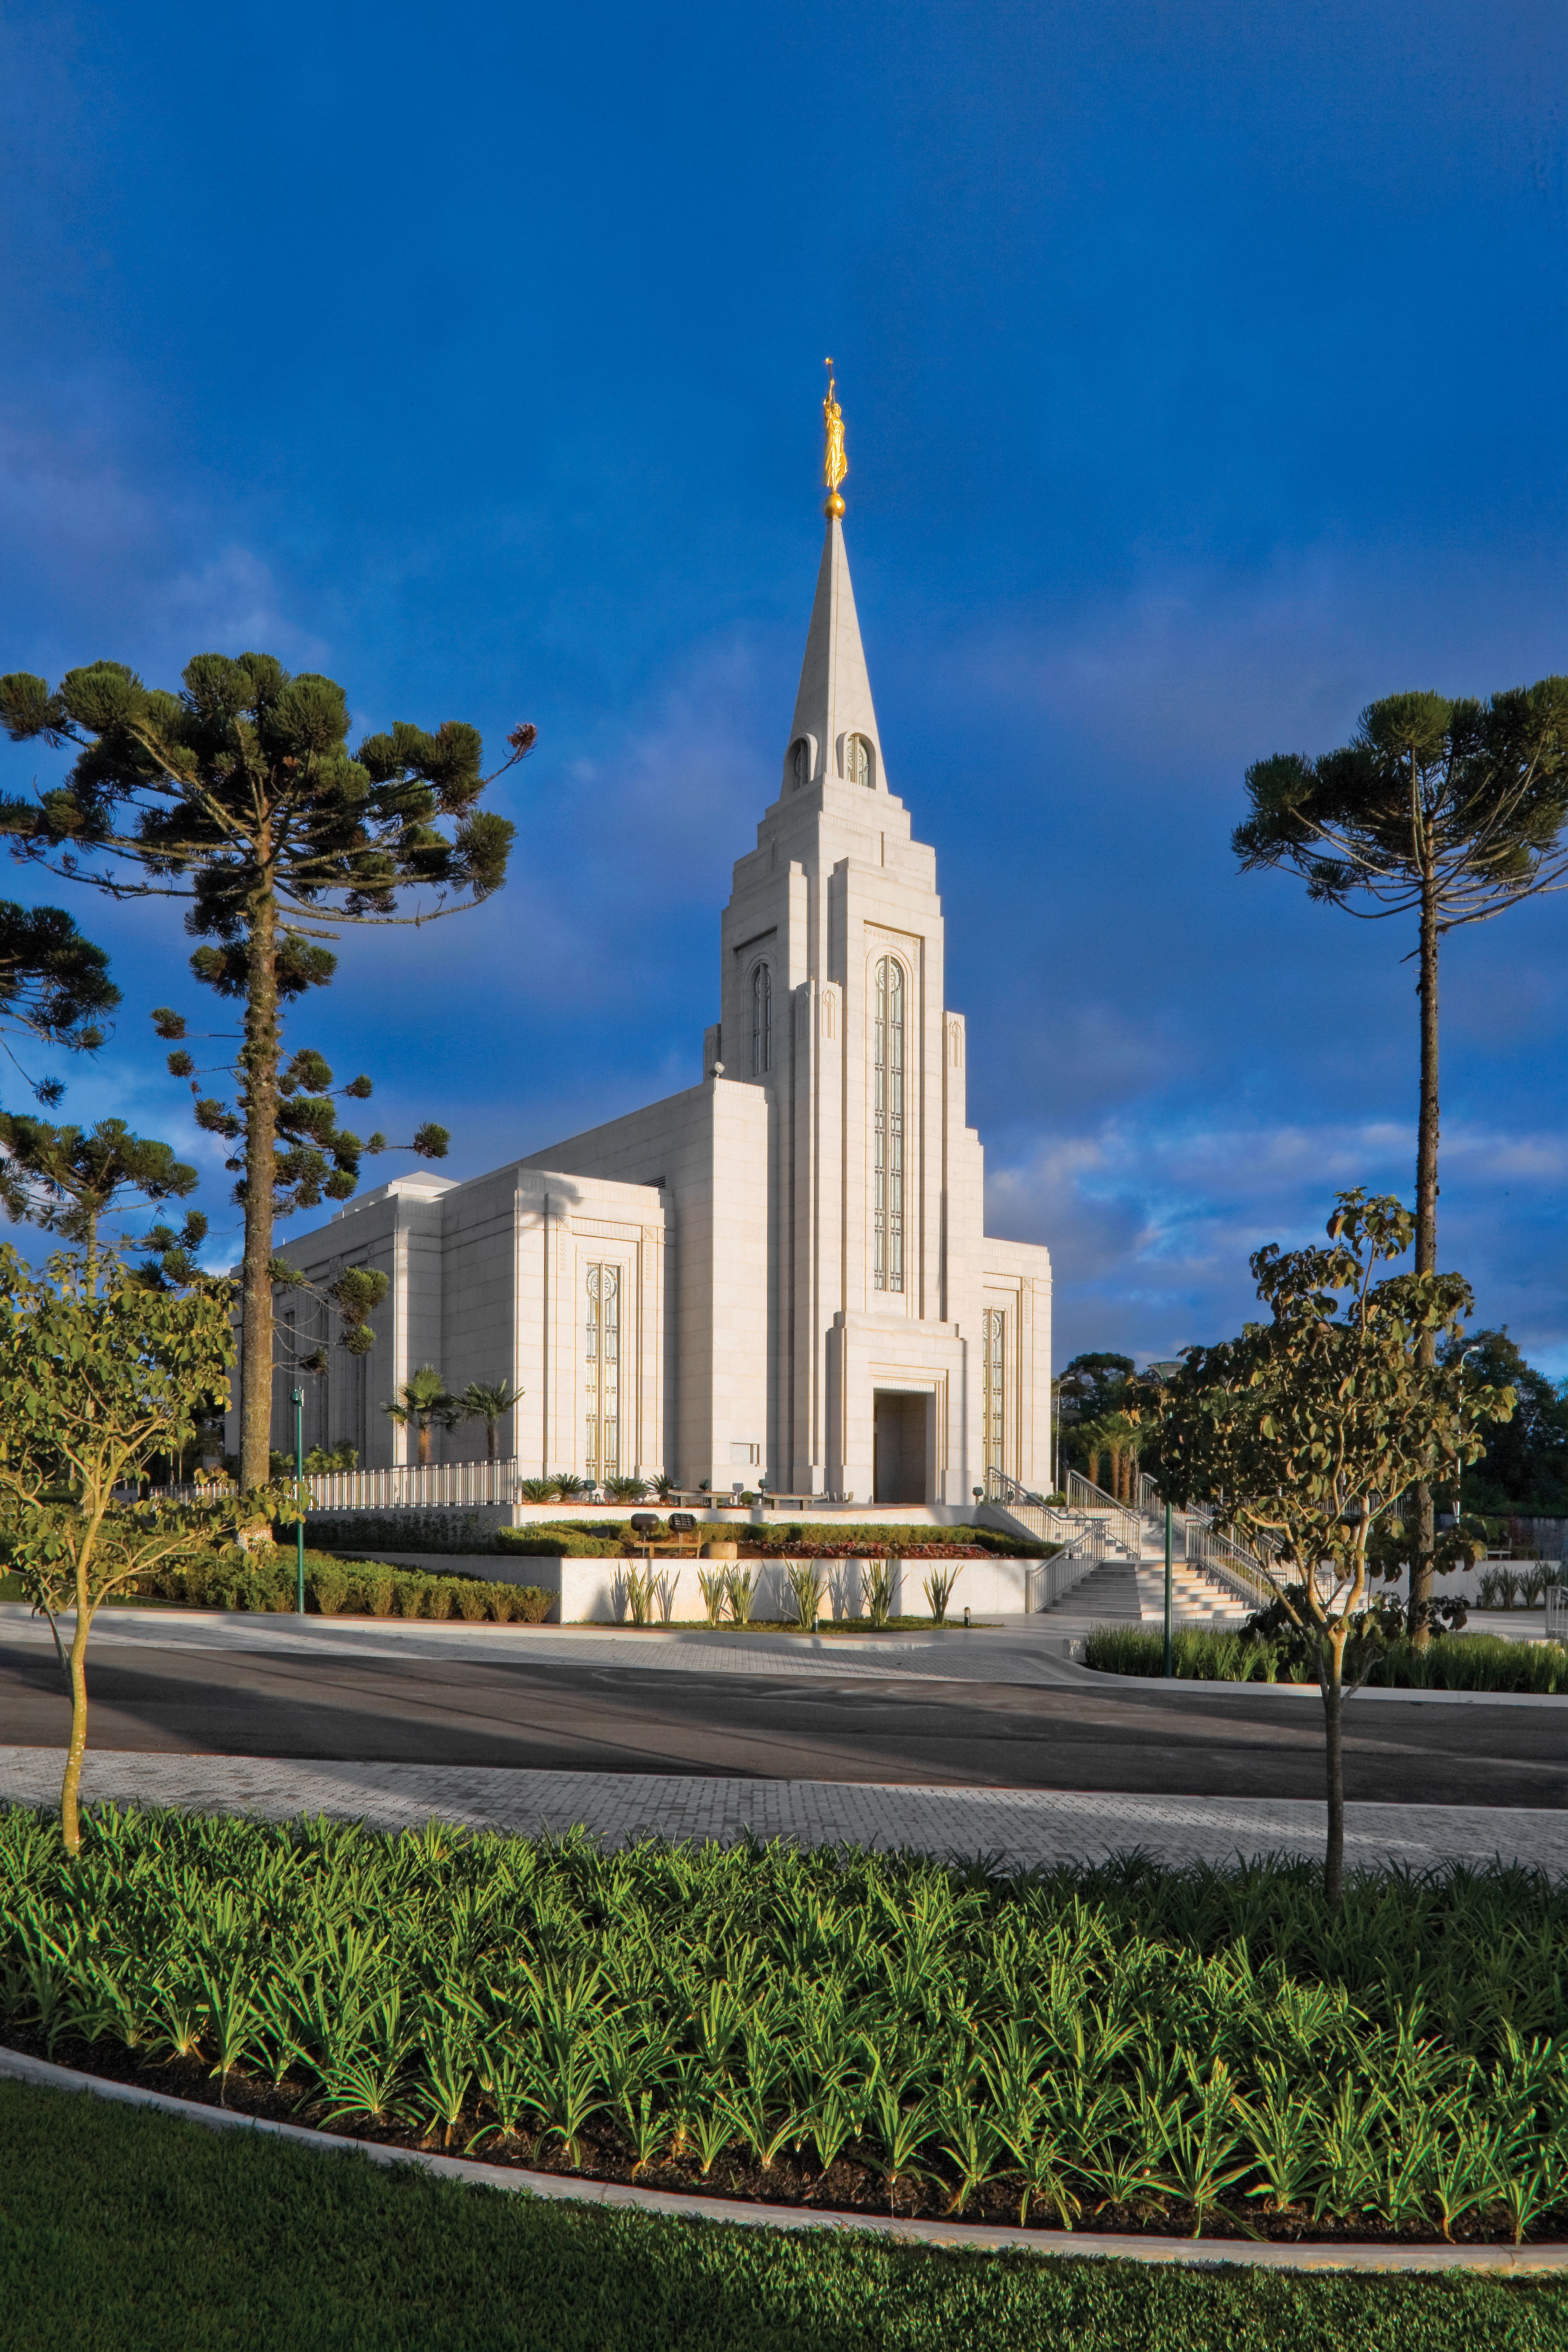 A view of the Curitiba Brazil Temple from the temple grounds.